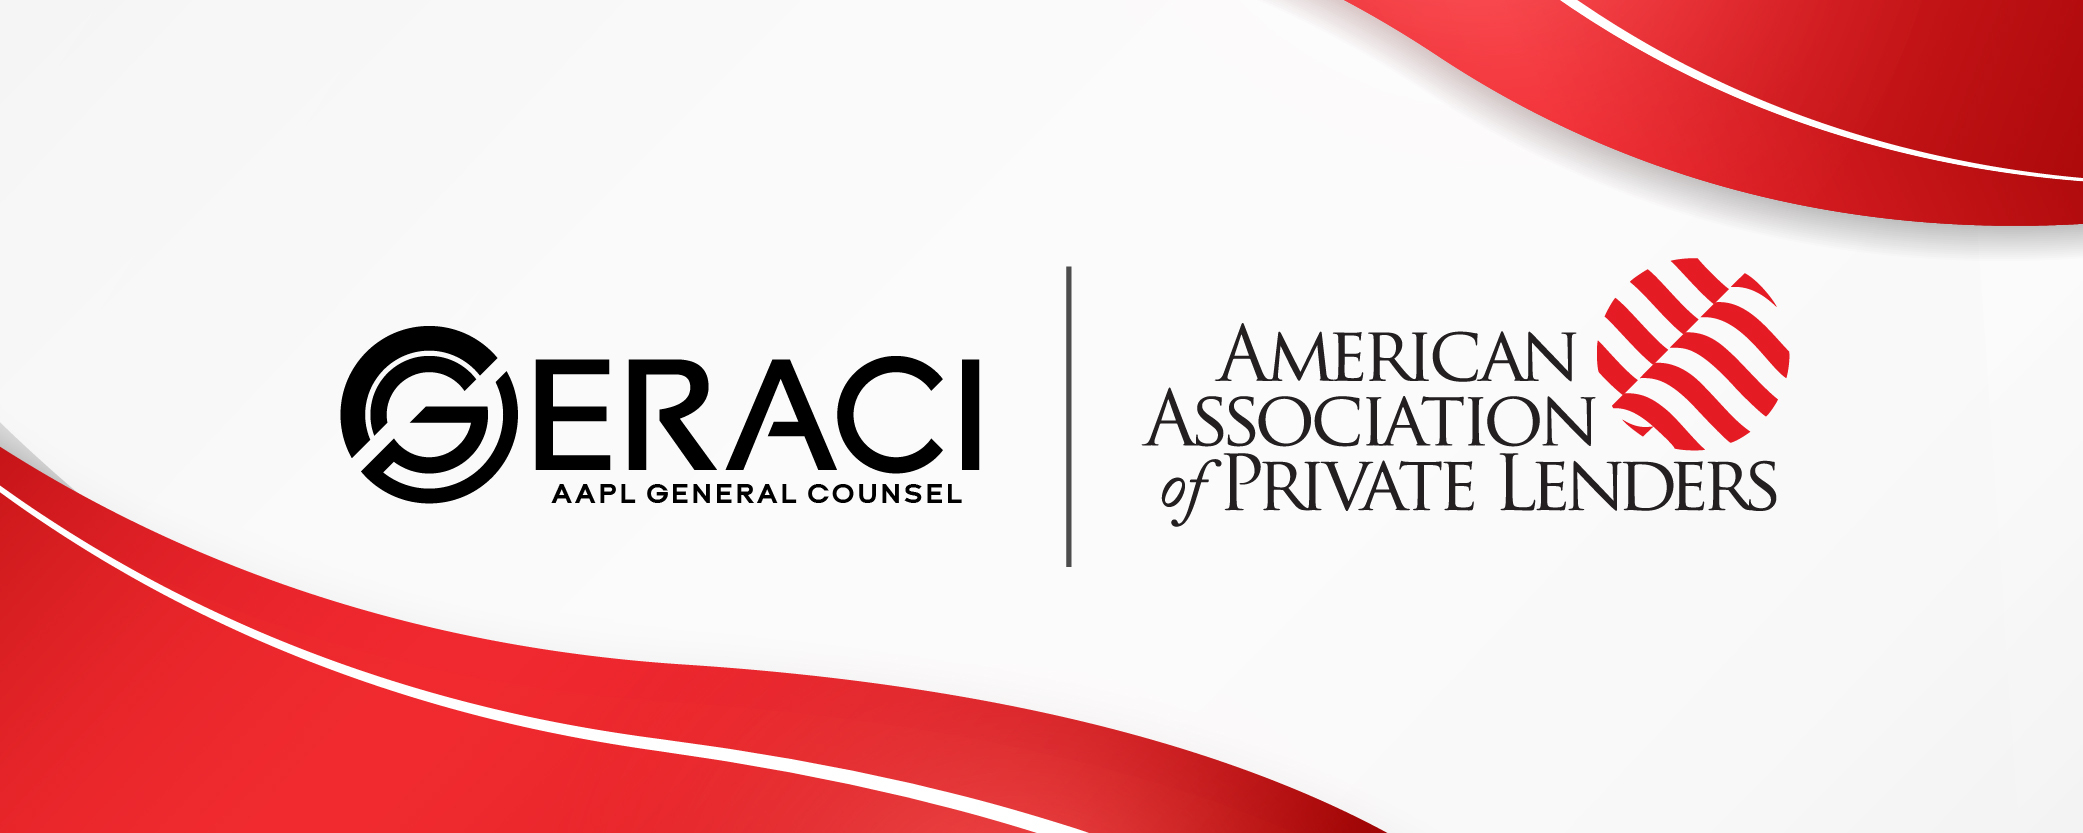 Geraci AAPL General Counsel x AAPL Banner-01